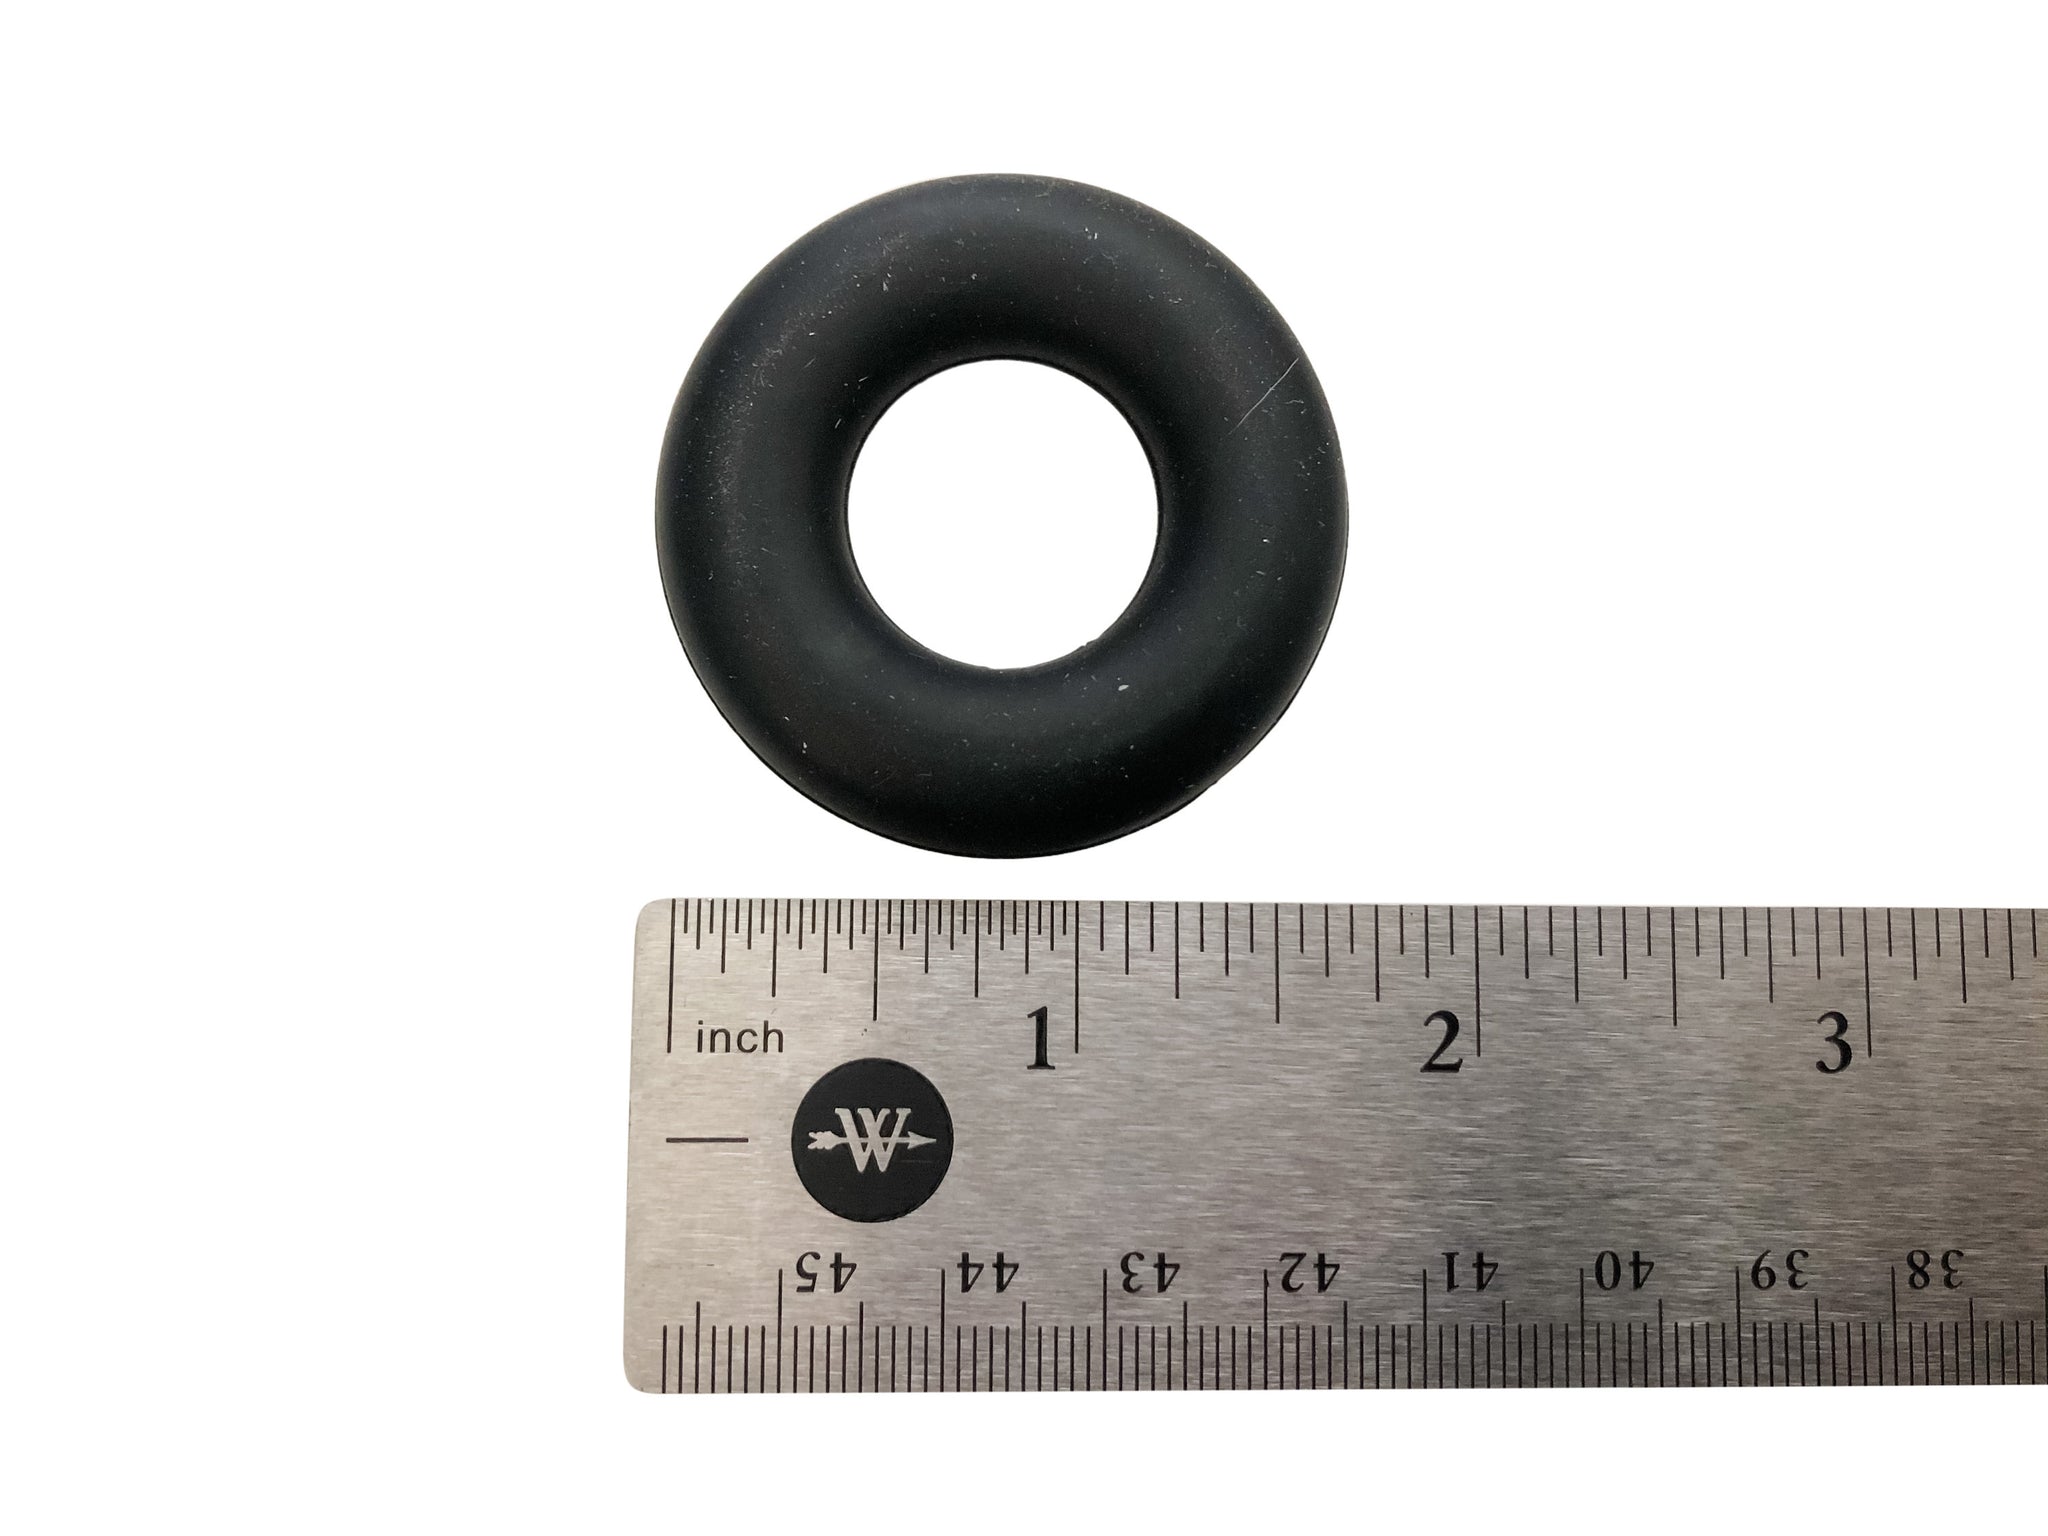 Grey Silicone Ring Beads Pendant - Gray - Seamless Silicone Donut Beads